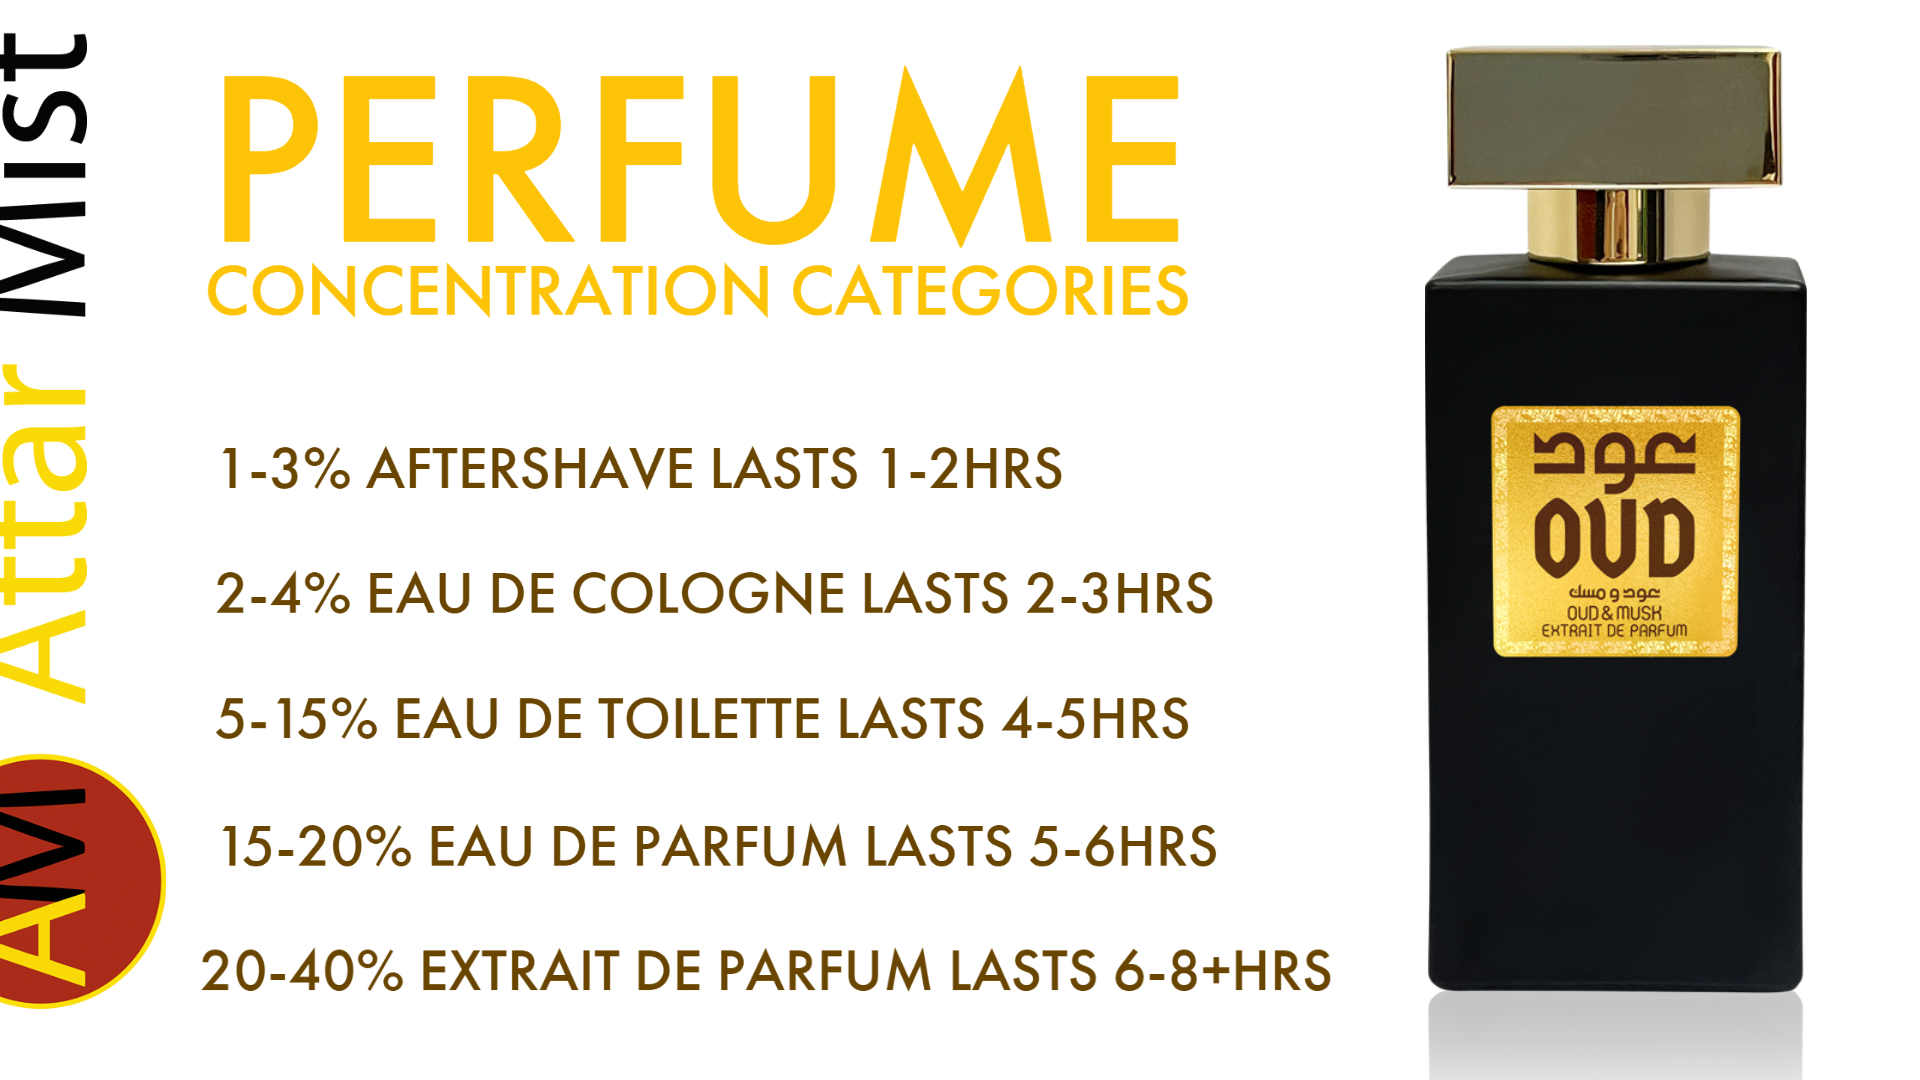 Perfume Concentration Categories